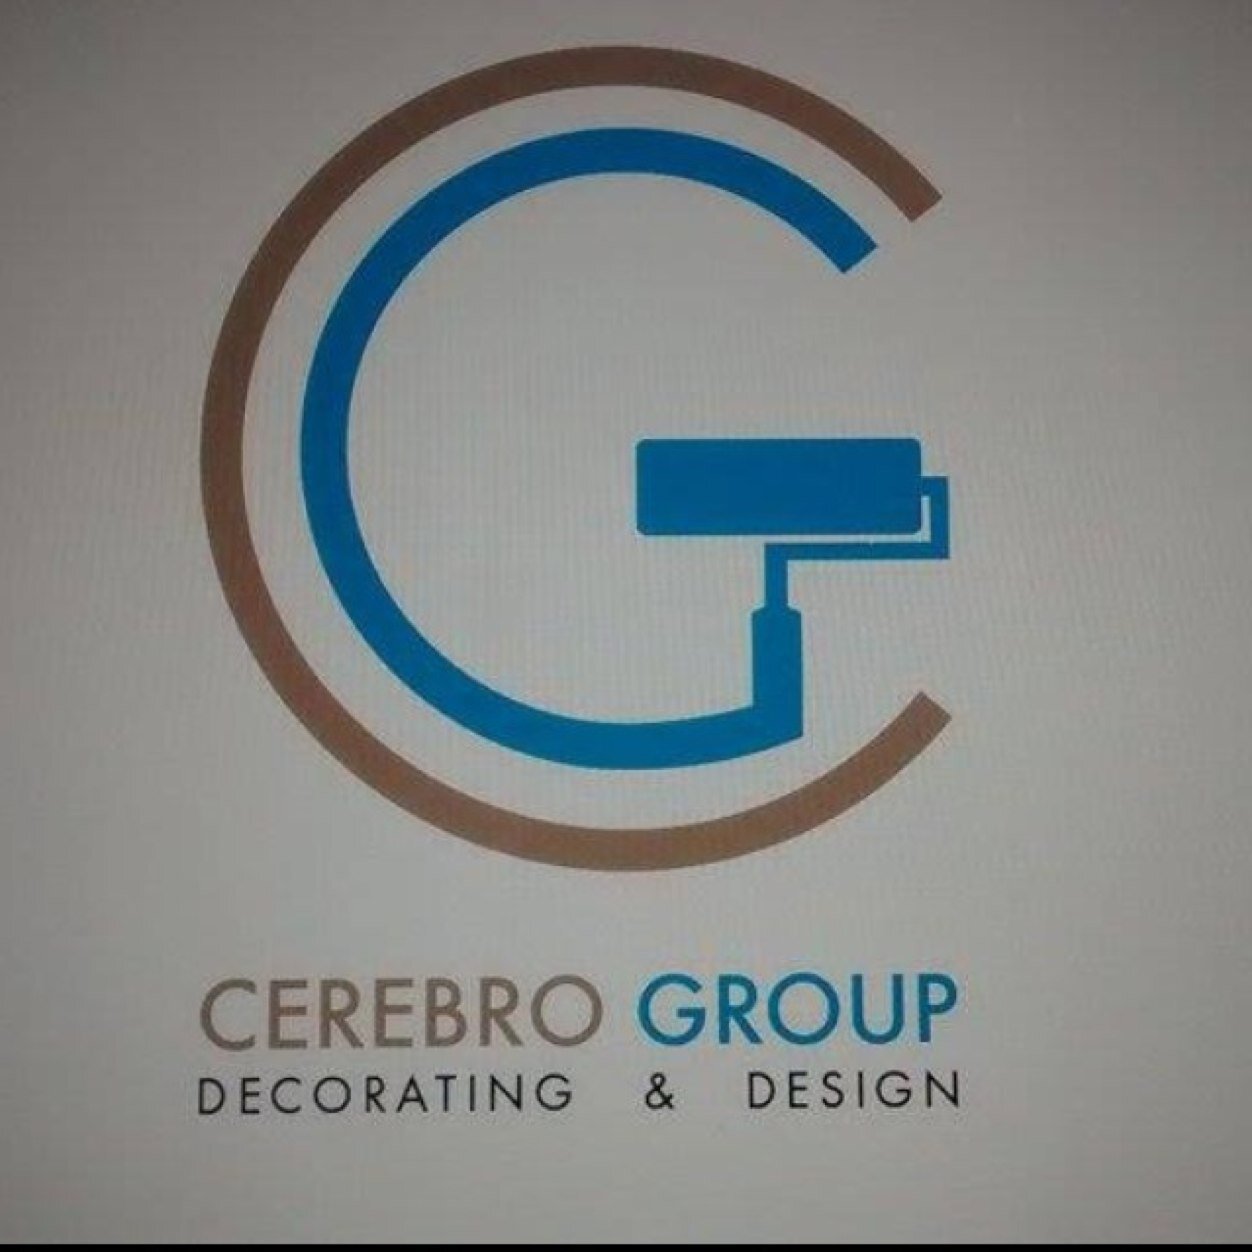 CerebroGroup 'Business With You In Mind'